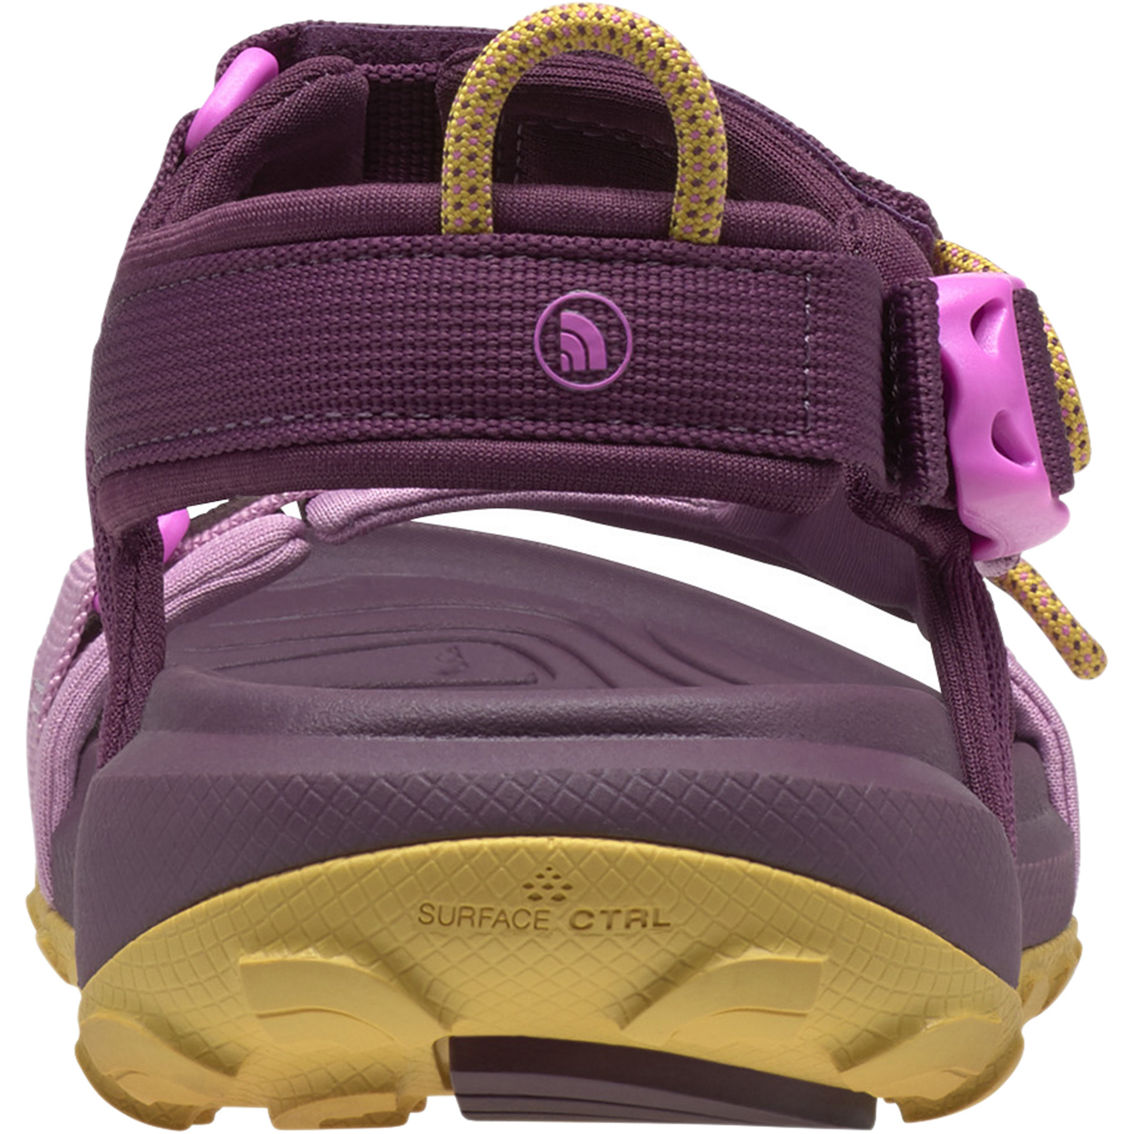 The North Face Women's Explore Camp Sandals - Image 4 of 4